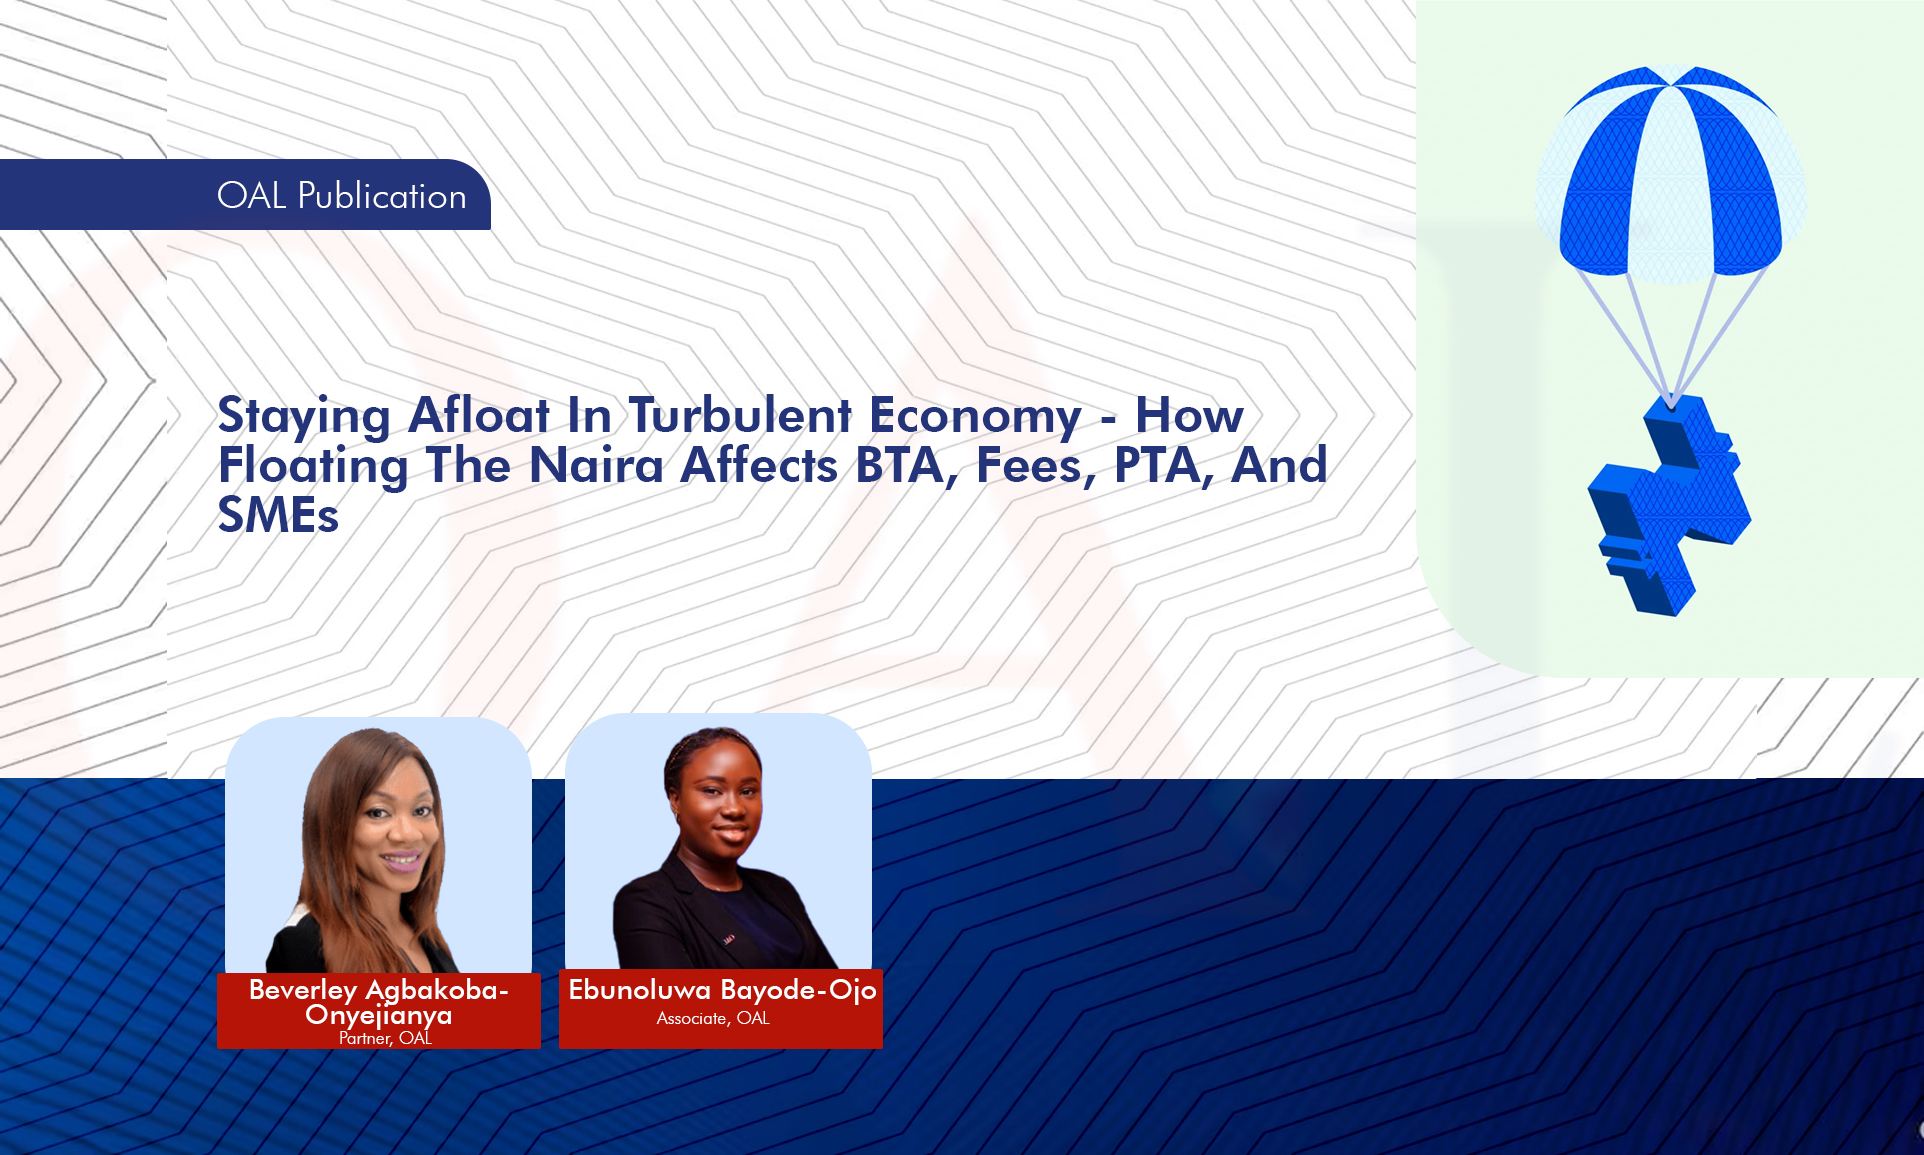 Staying Afloat In Turbulent Economy - How Floating The Naira Affects BTA, Fees, PTA, And SMEs.